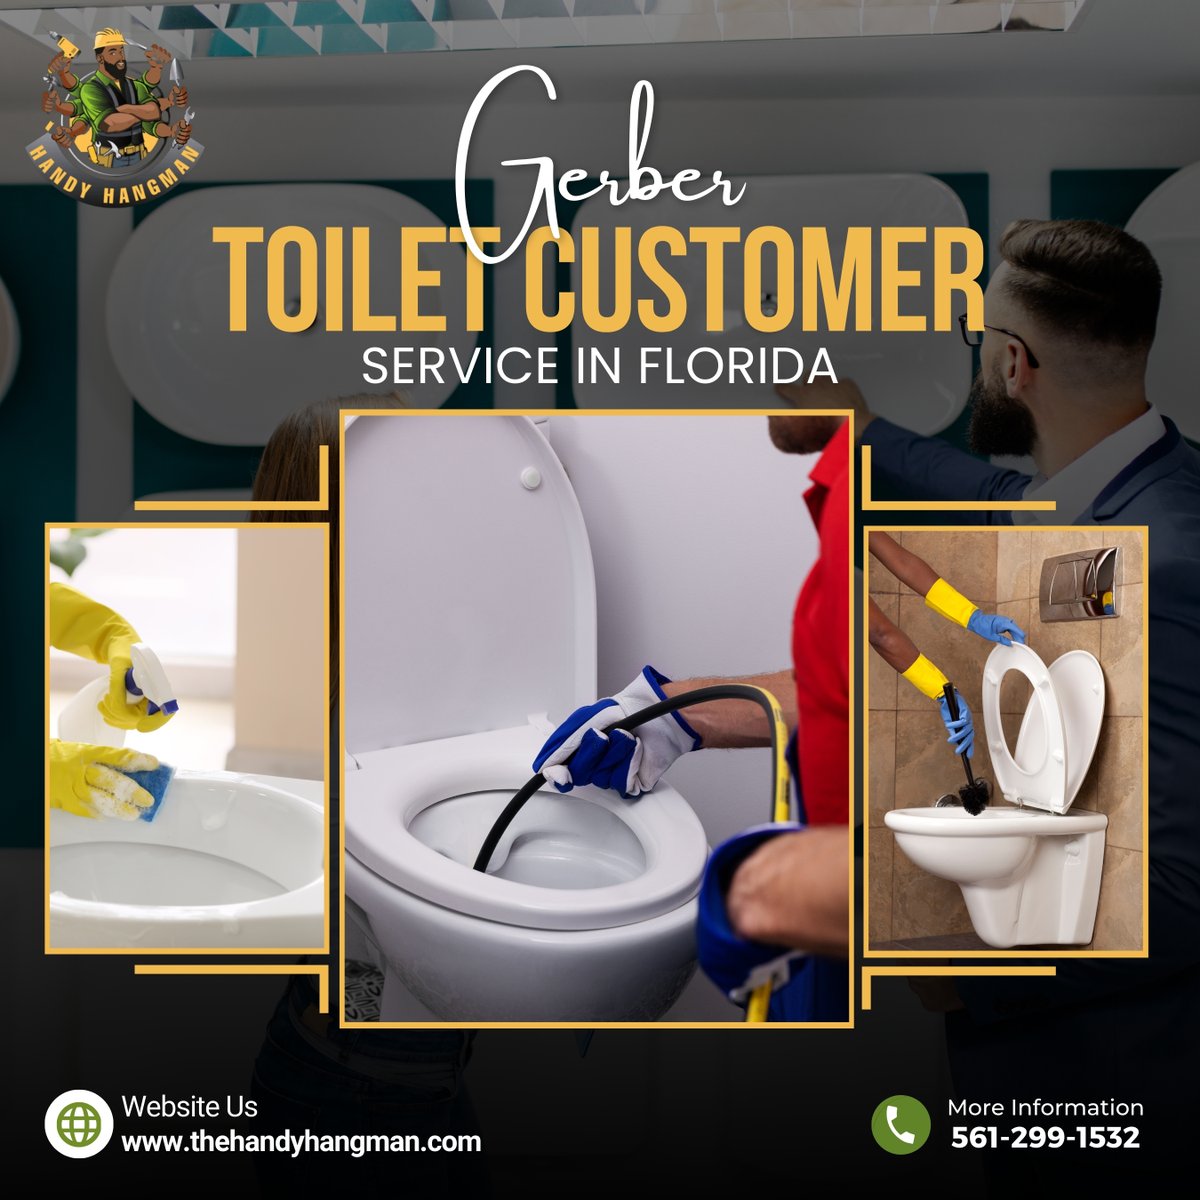 Need reliable Gerber toilet customer service in Florida? Look no further than thehandyhangman! From repairs to installations, we're your trusted choice. Visit our website for details. #GerberToilet #FloridaPlumbing #CustomerService